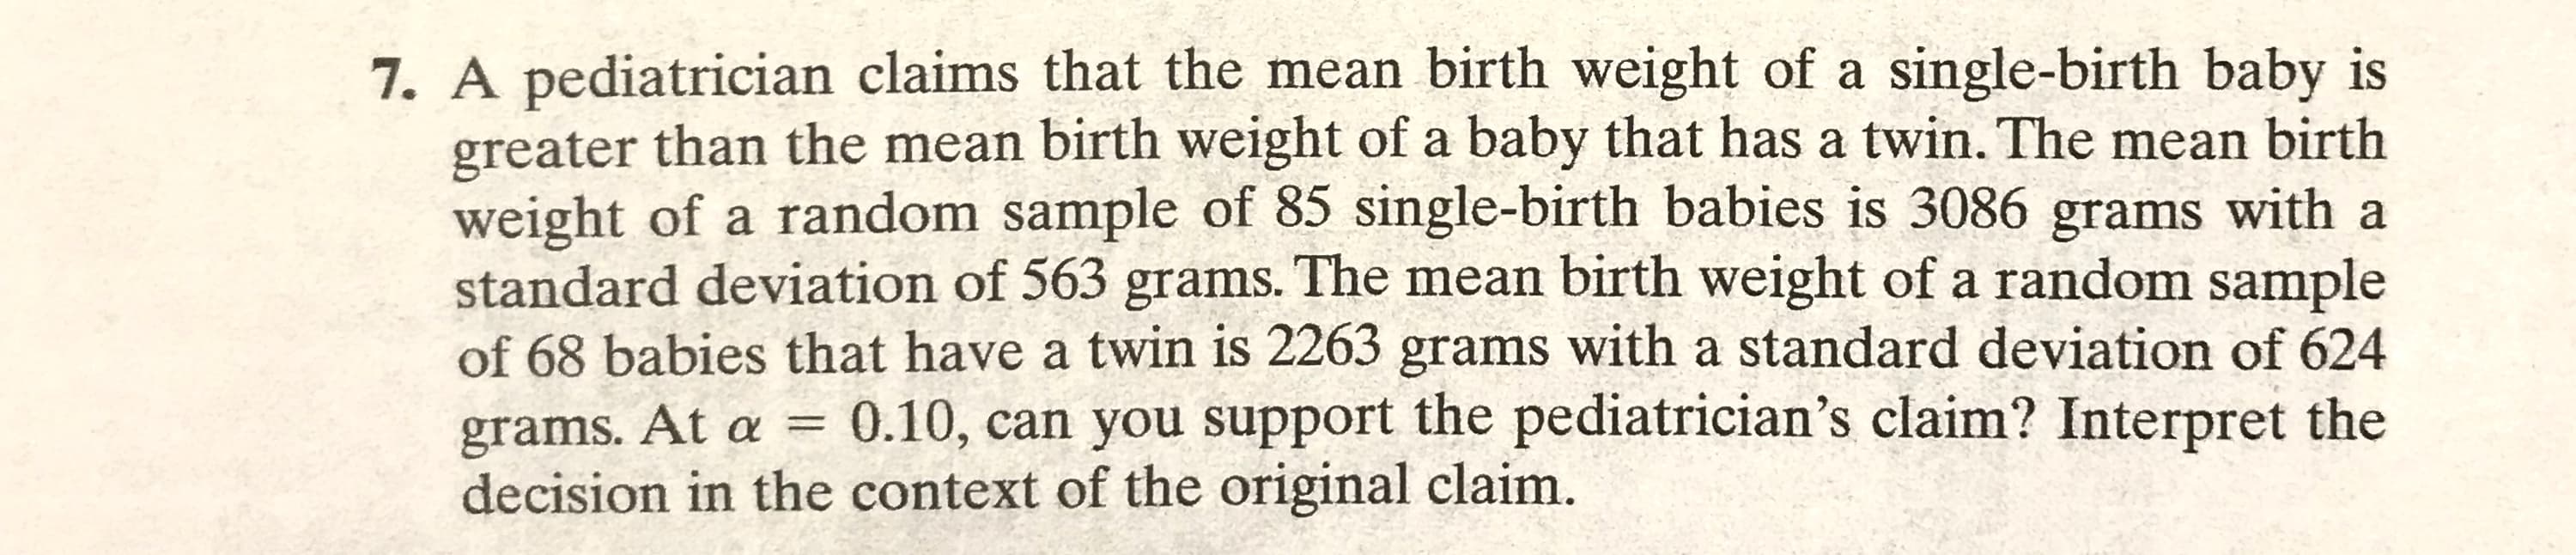 7. A pediatrician claims that the mean birth weight of a single-birth baby is
greater than the mean birth weight of a baby that has a twin. The mean birth
weight of a random sample of 85 single-birth babies is 3086 grams with a
standard deviation of 563 grams. The mean birth weight of a random sample
of 68 babies that have a twin is 2263 grams with a standard deviation of 624
grams. At a = 0.10, can you support the pediatrician's claim? Interpret the
decision in the context of the original claim.
